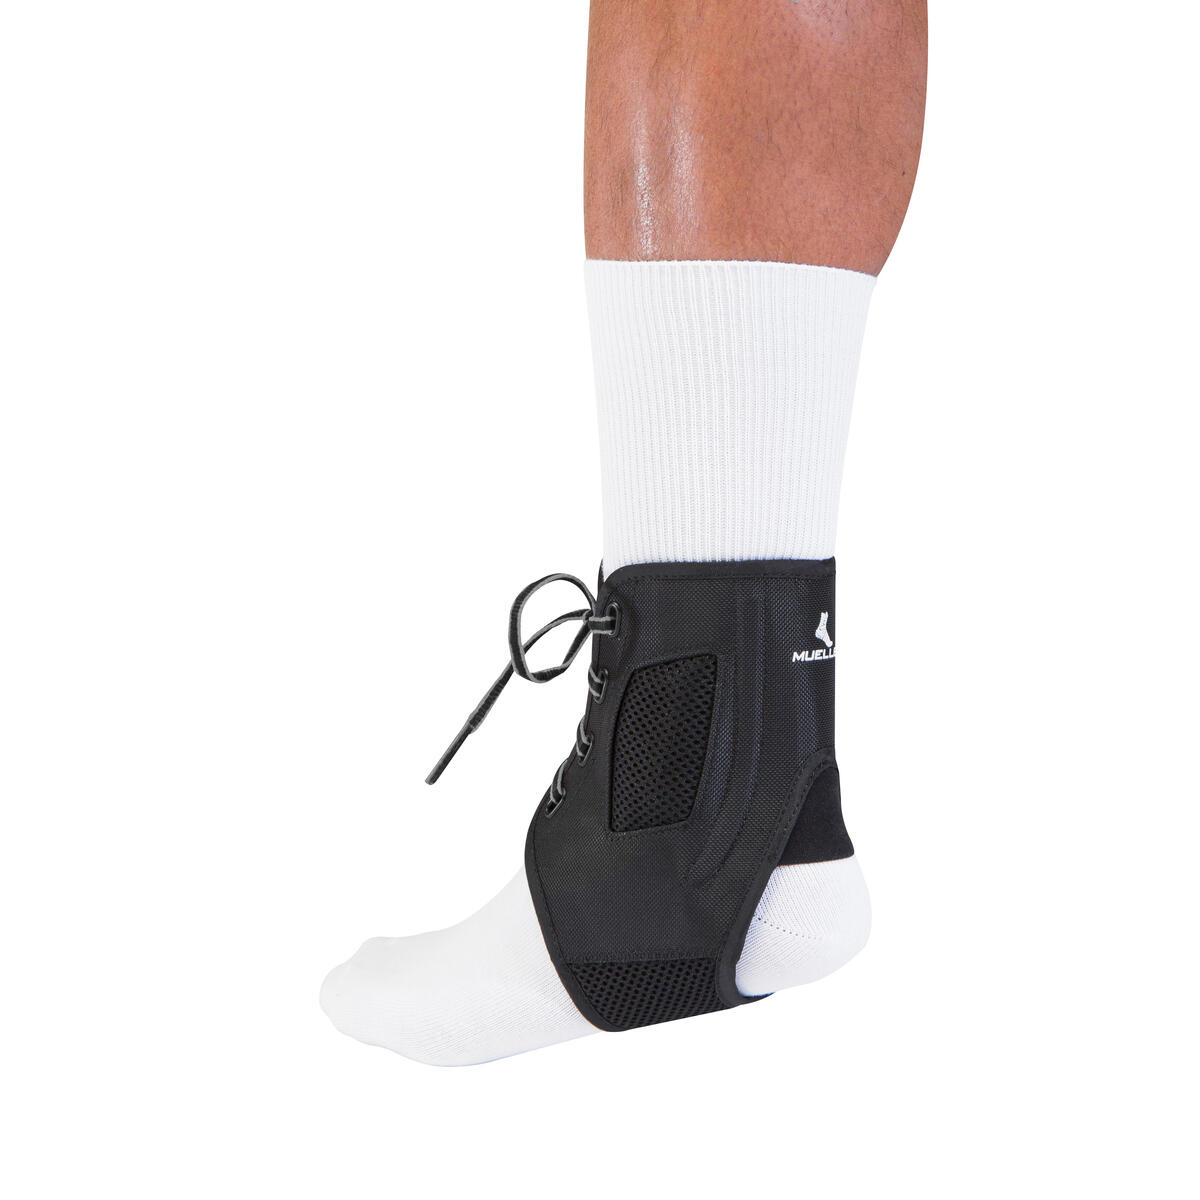 Mueller Ankle Brace Adjust to Fit Laced Firm Support - Medium 3/3